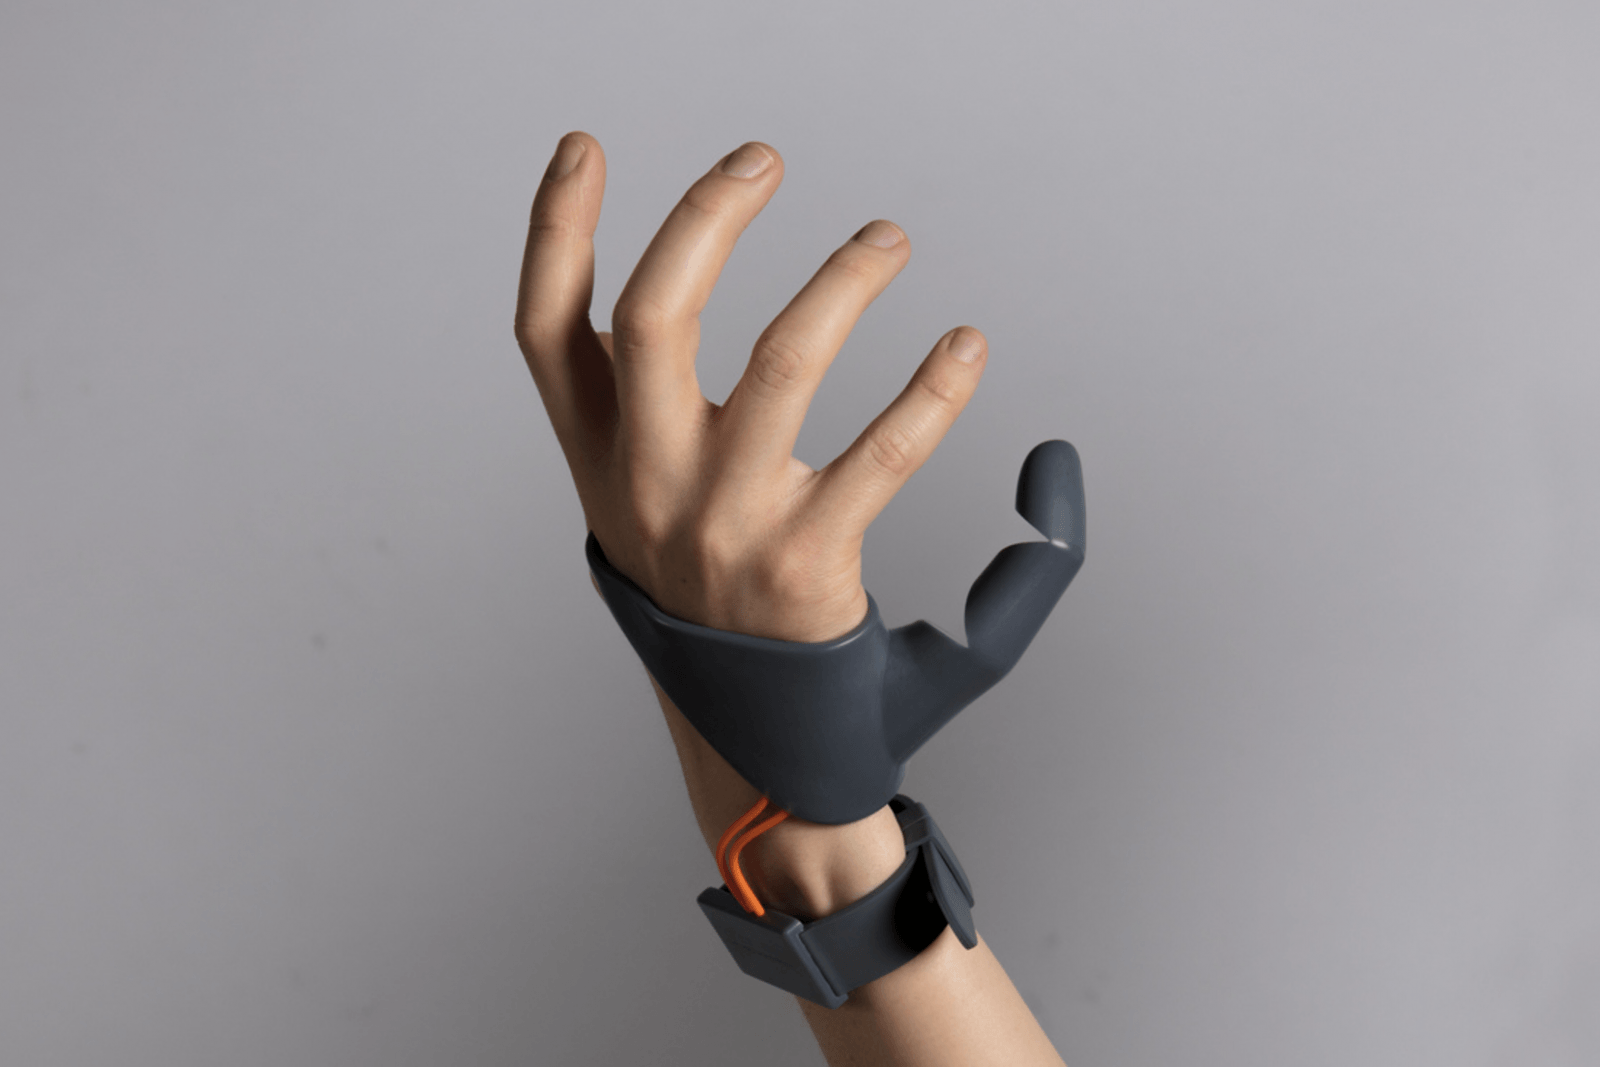 Forget Third Arms, What About a Third Thumb?